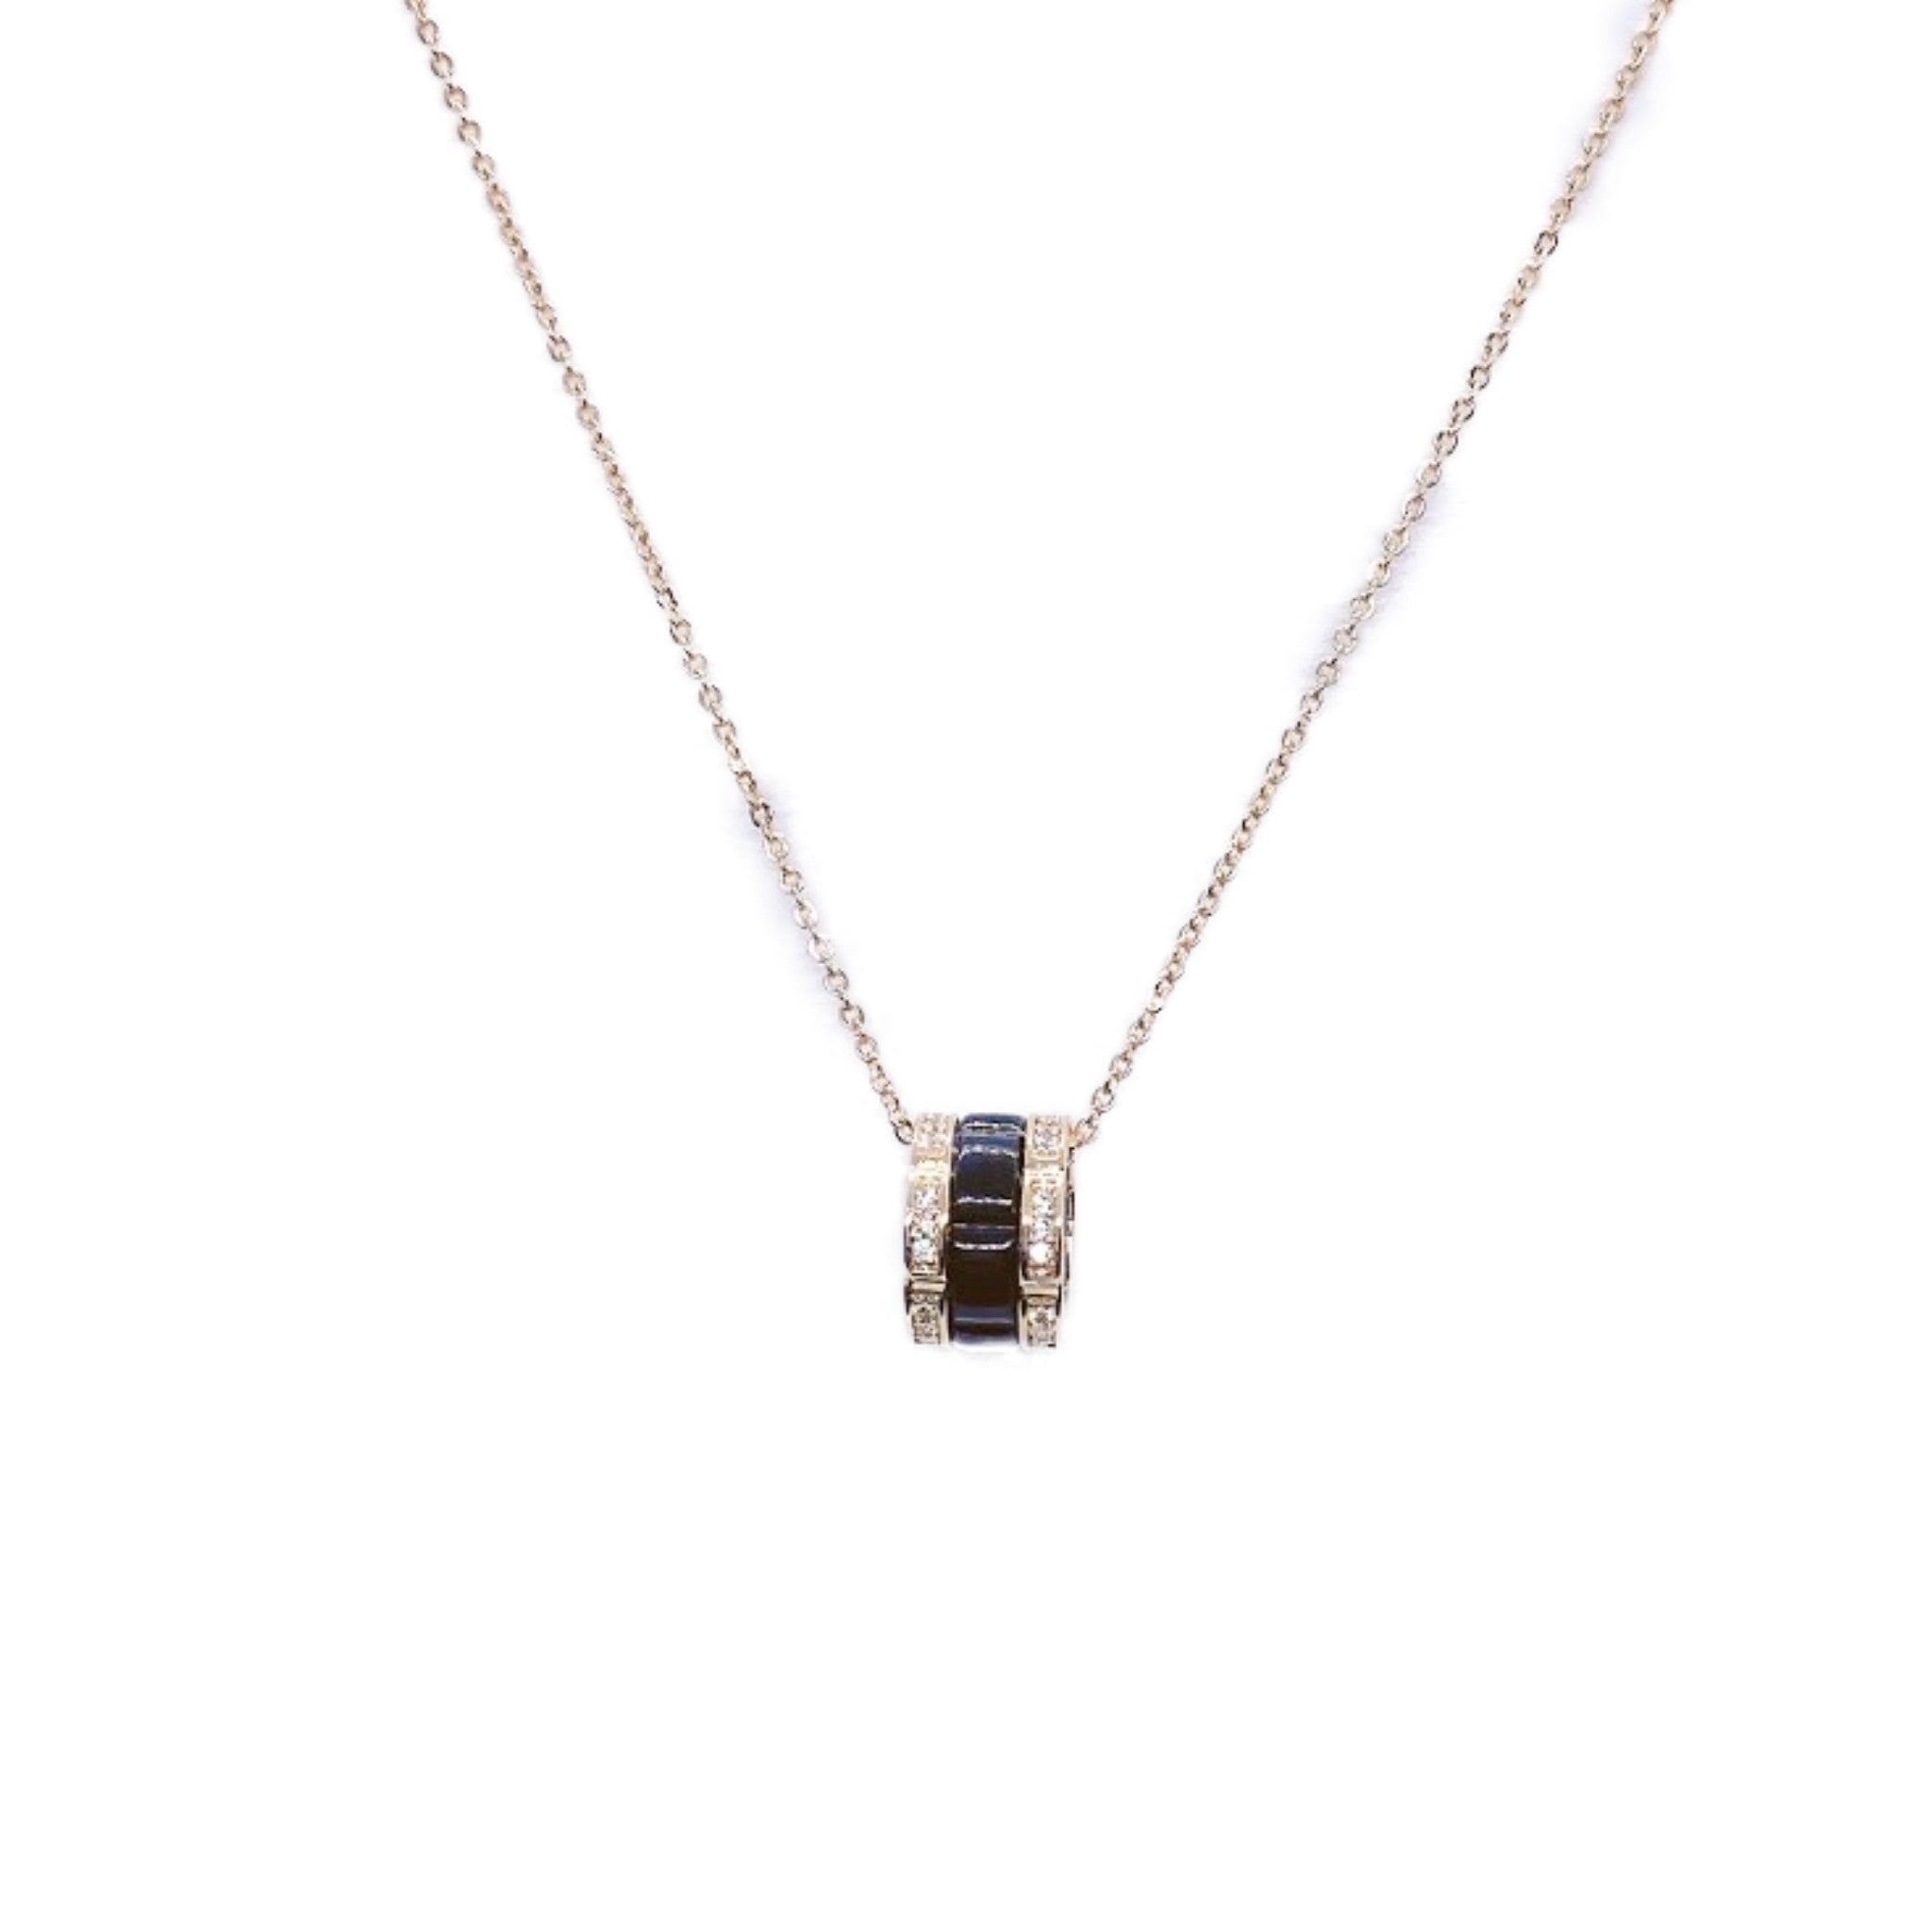 CHOMEL Cubic Zirconia Tunnel with Black Ceramic Centre Rosegold Necklace